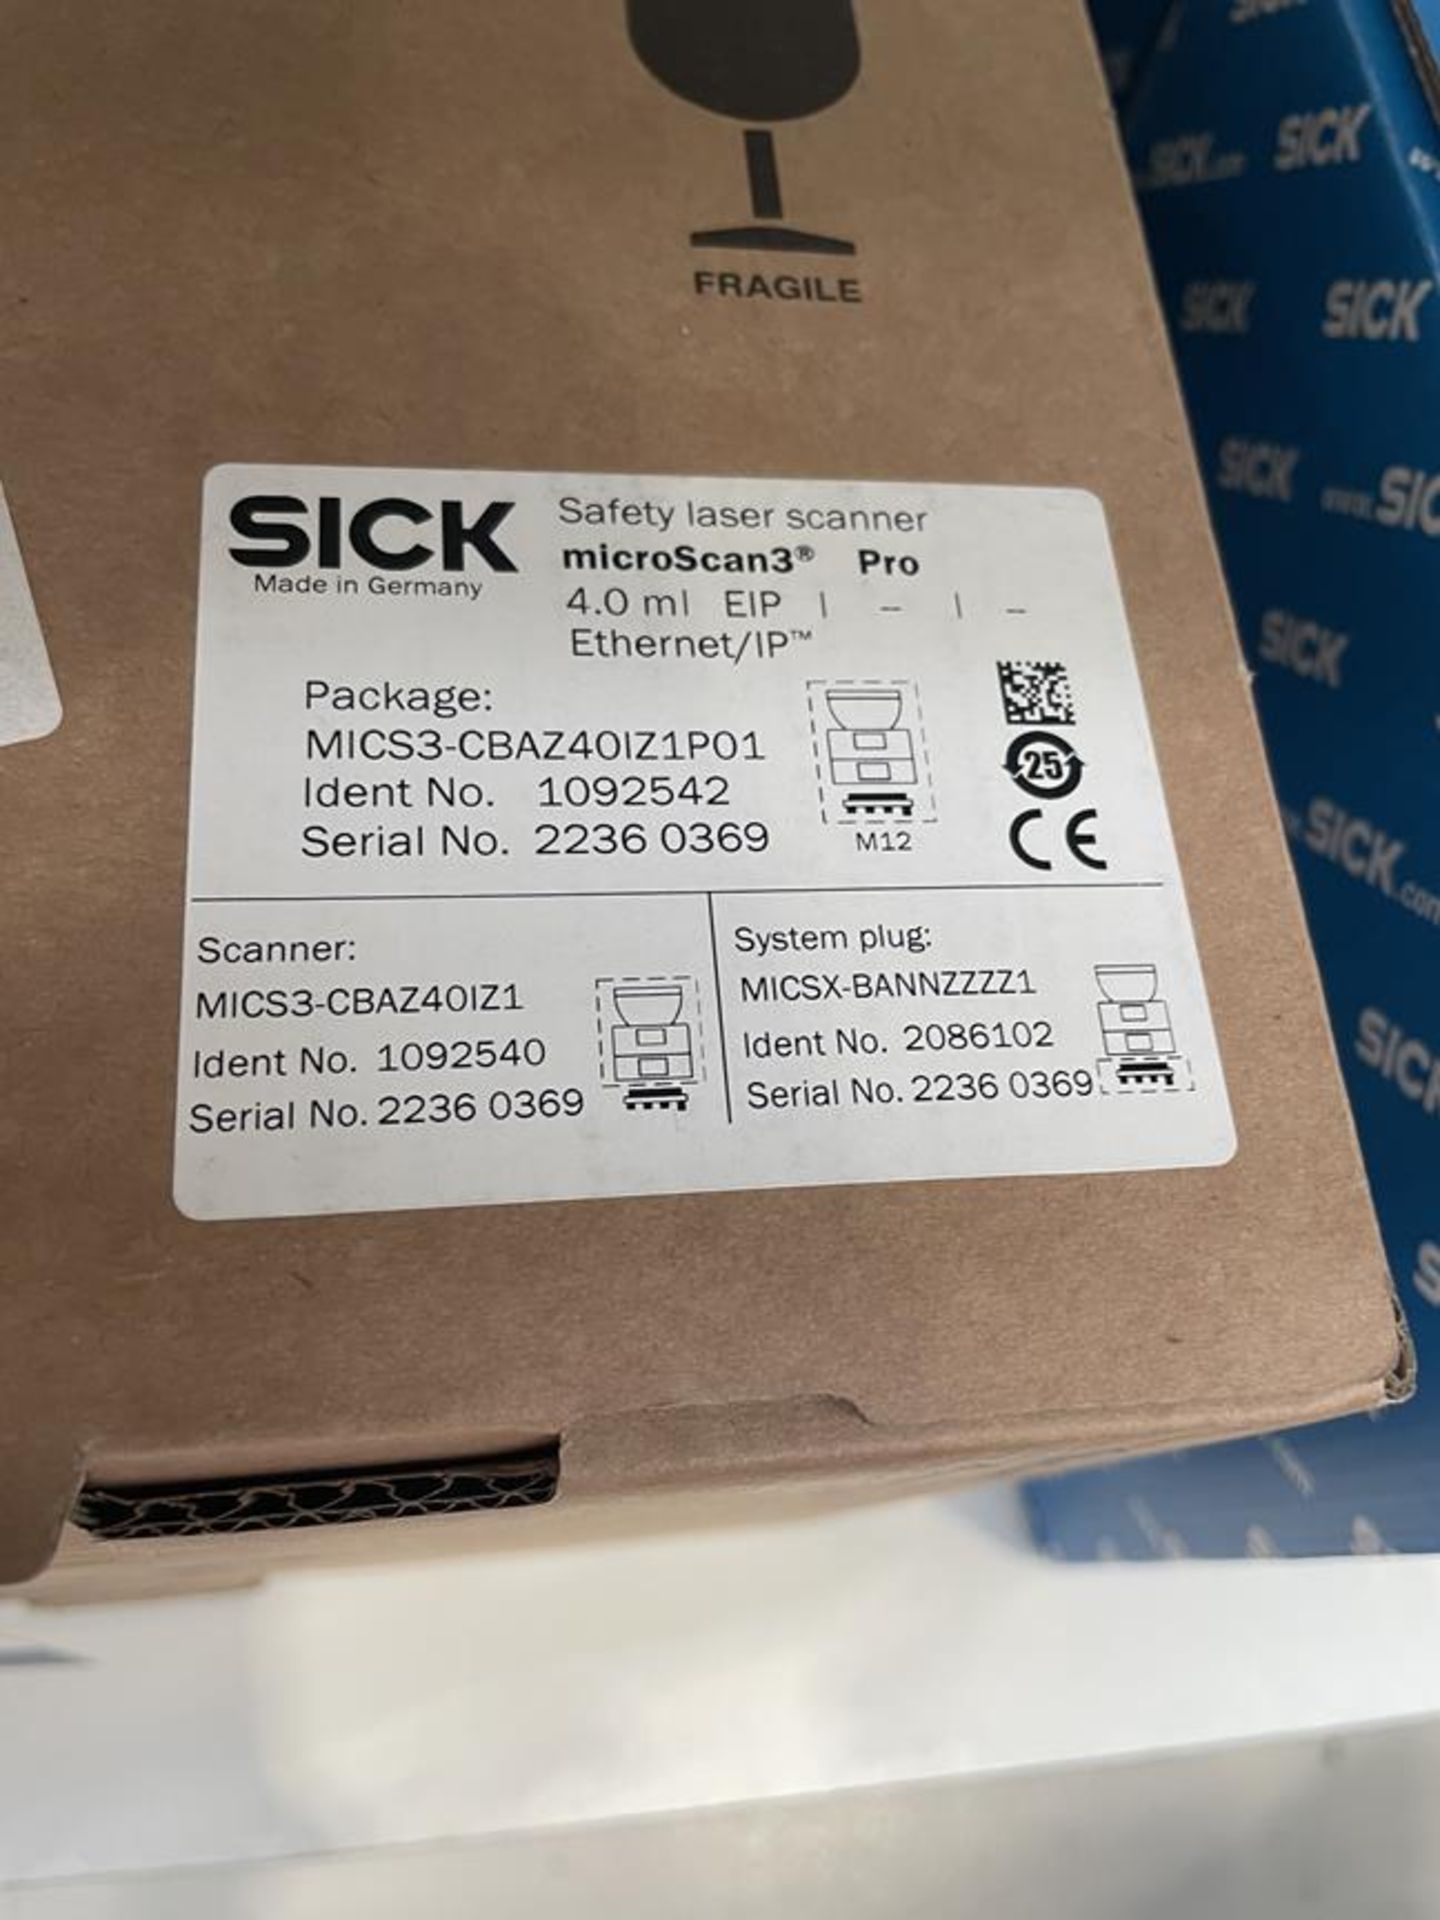 4x (no.) Sick, Microscan 3 Pro safety laser scanner (boxed and unused) - Image 2 of 2